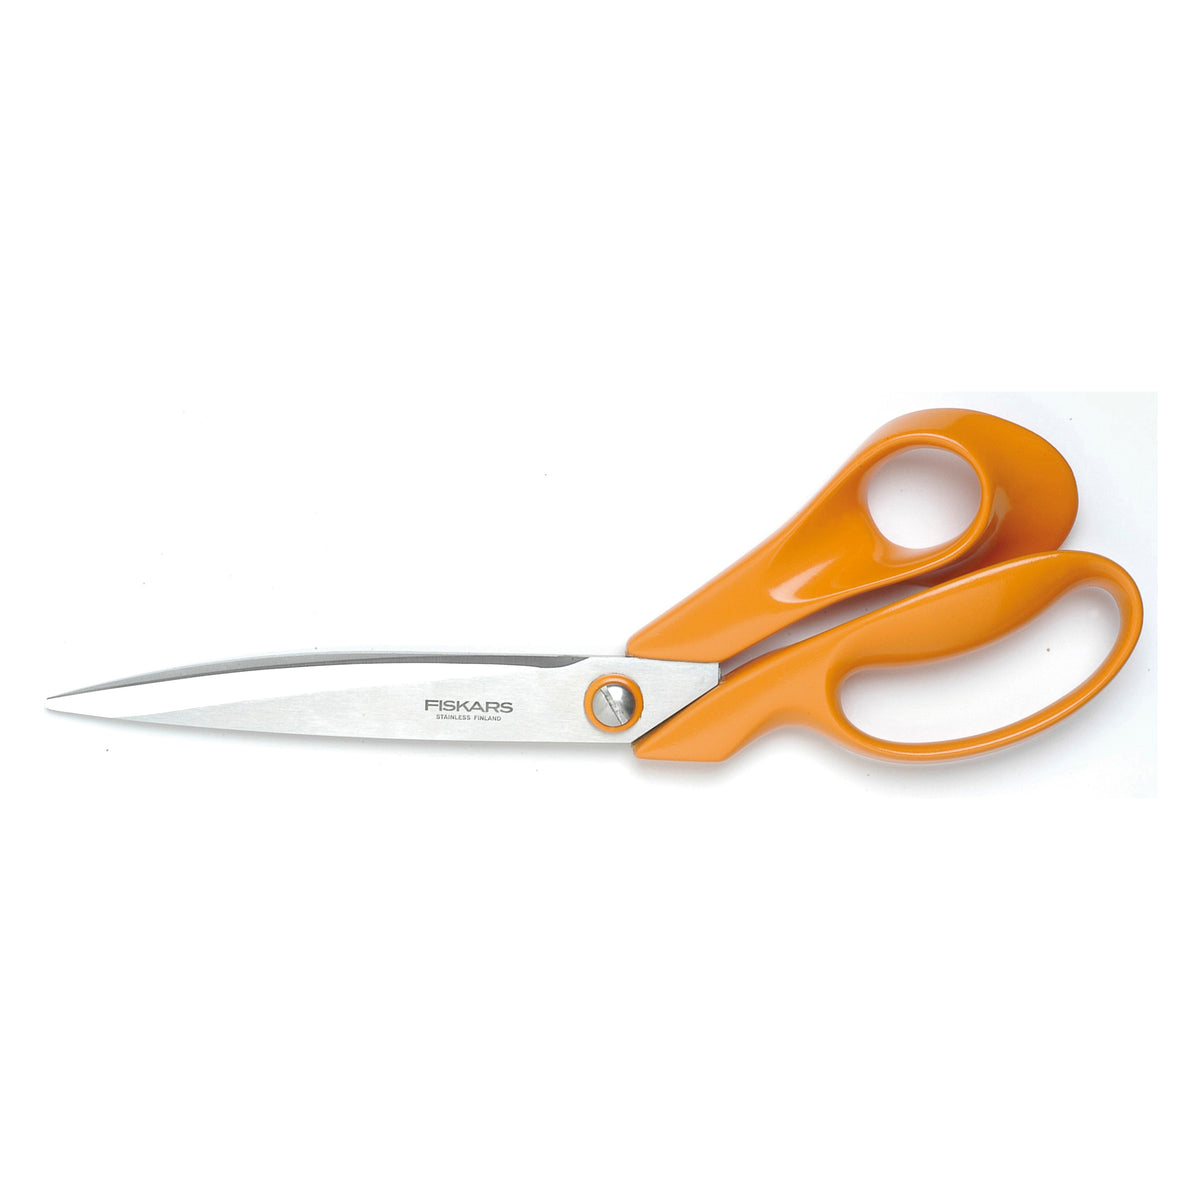 FISKARS Scissors: Classic: Tailors Shears: 27cm or 10.6in - Right Hand Use